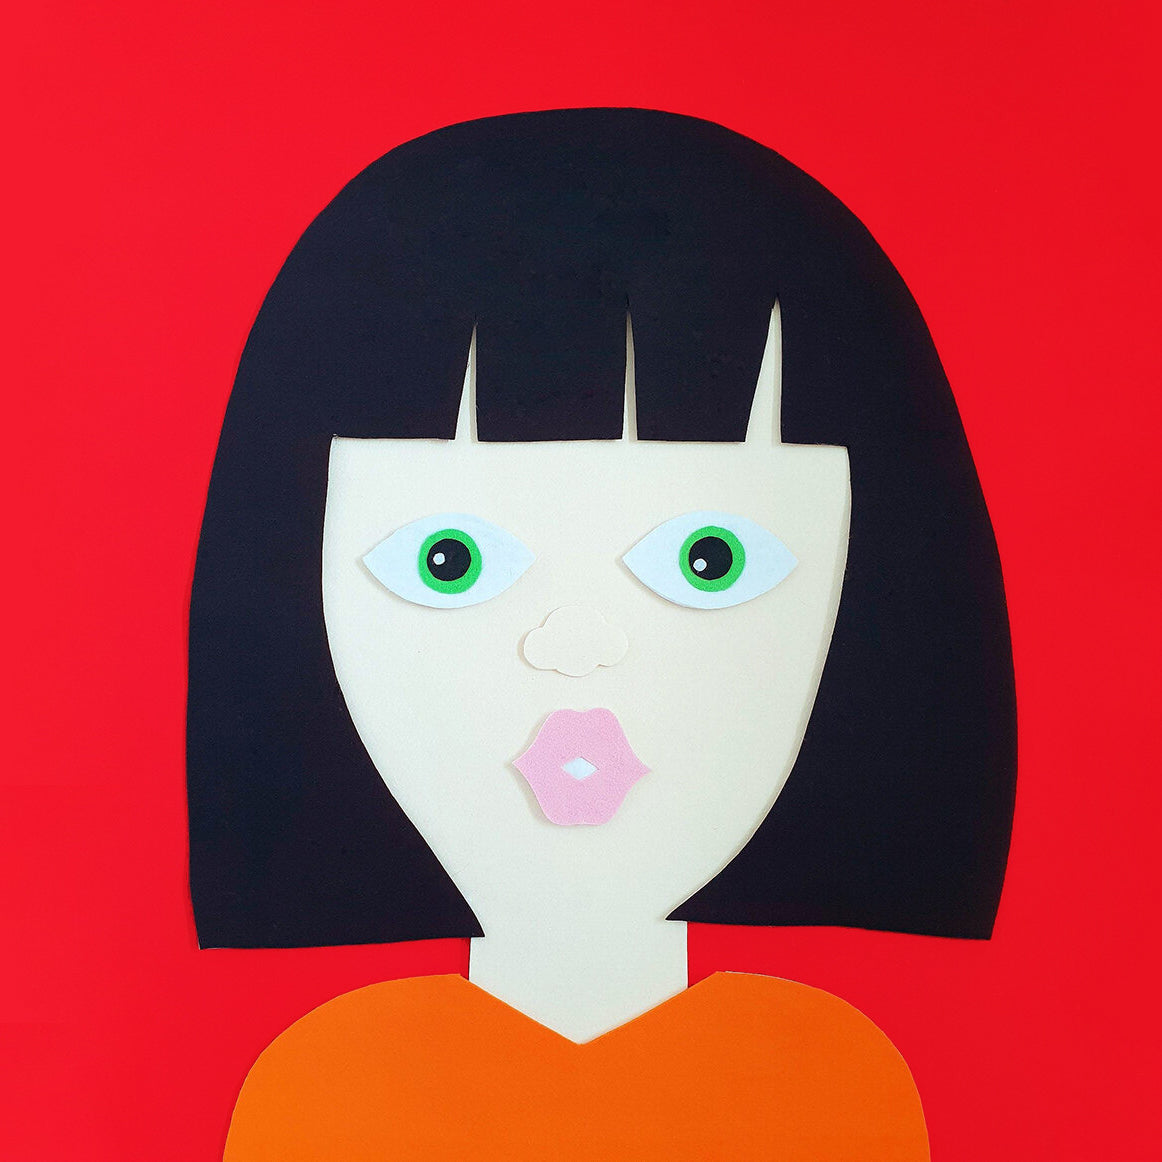 A felt collage installation of an Asian woman with short black hair, on a red background